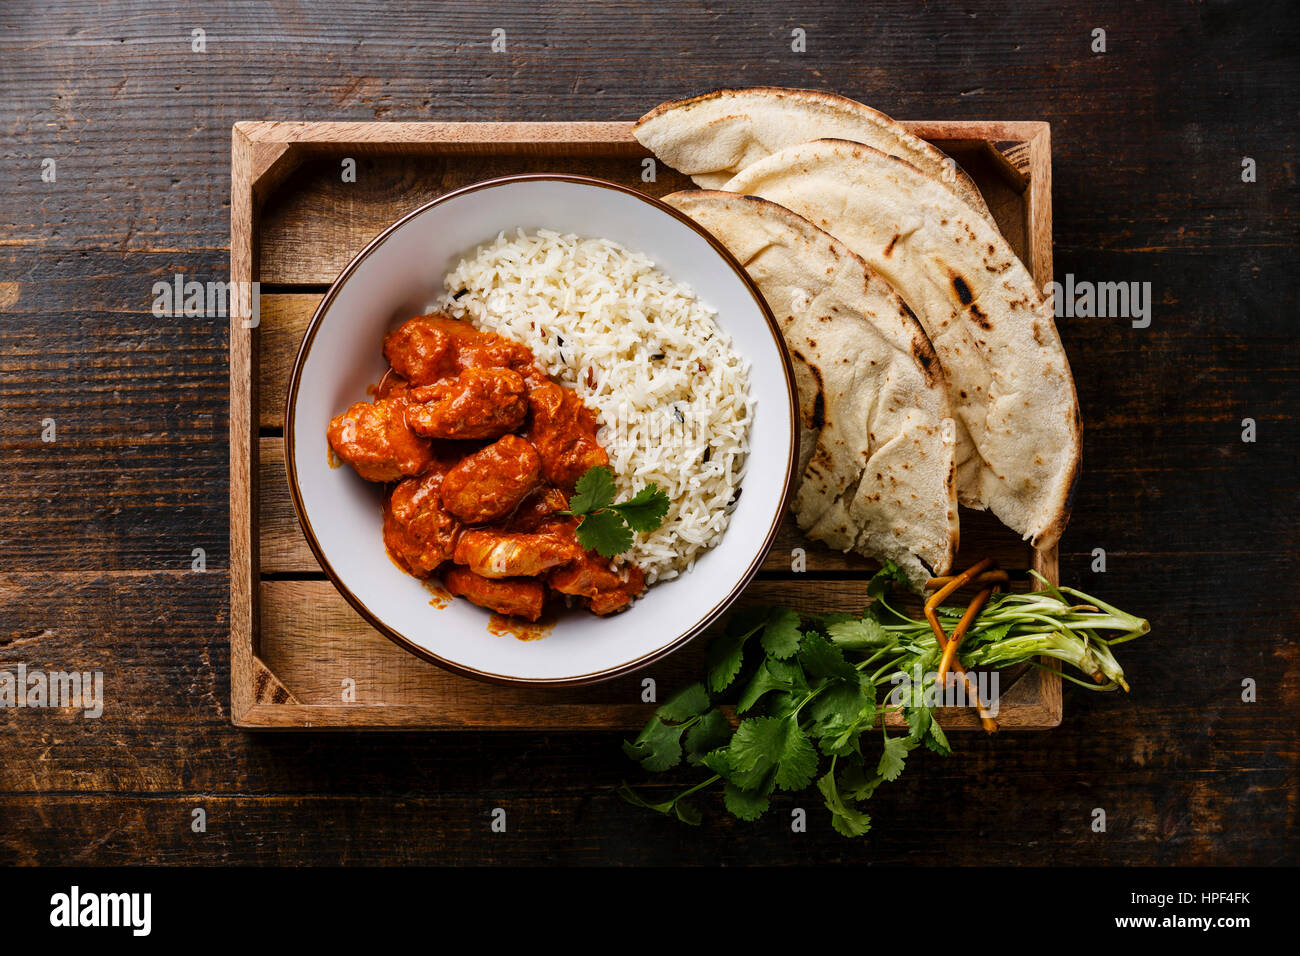 Chicken tikka masala spicy curry meat food with rice and naan bread in tray on wooden background Stock Photo